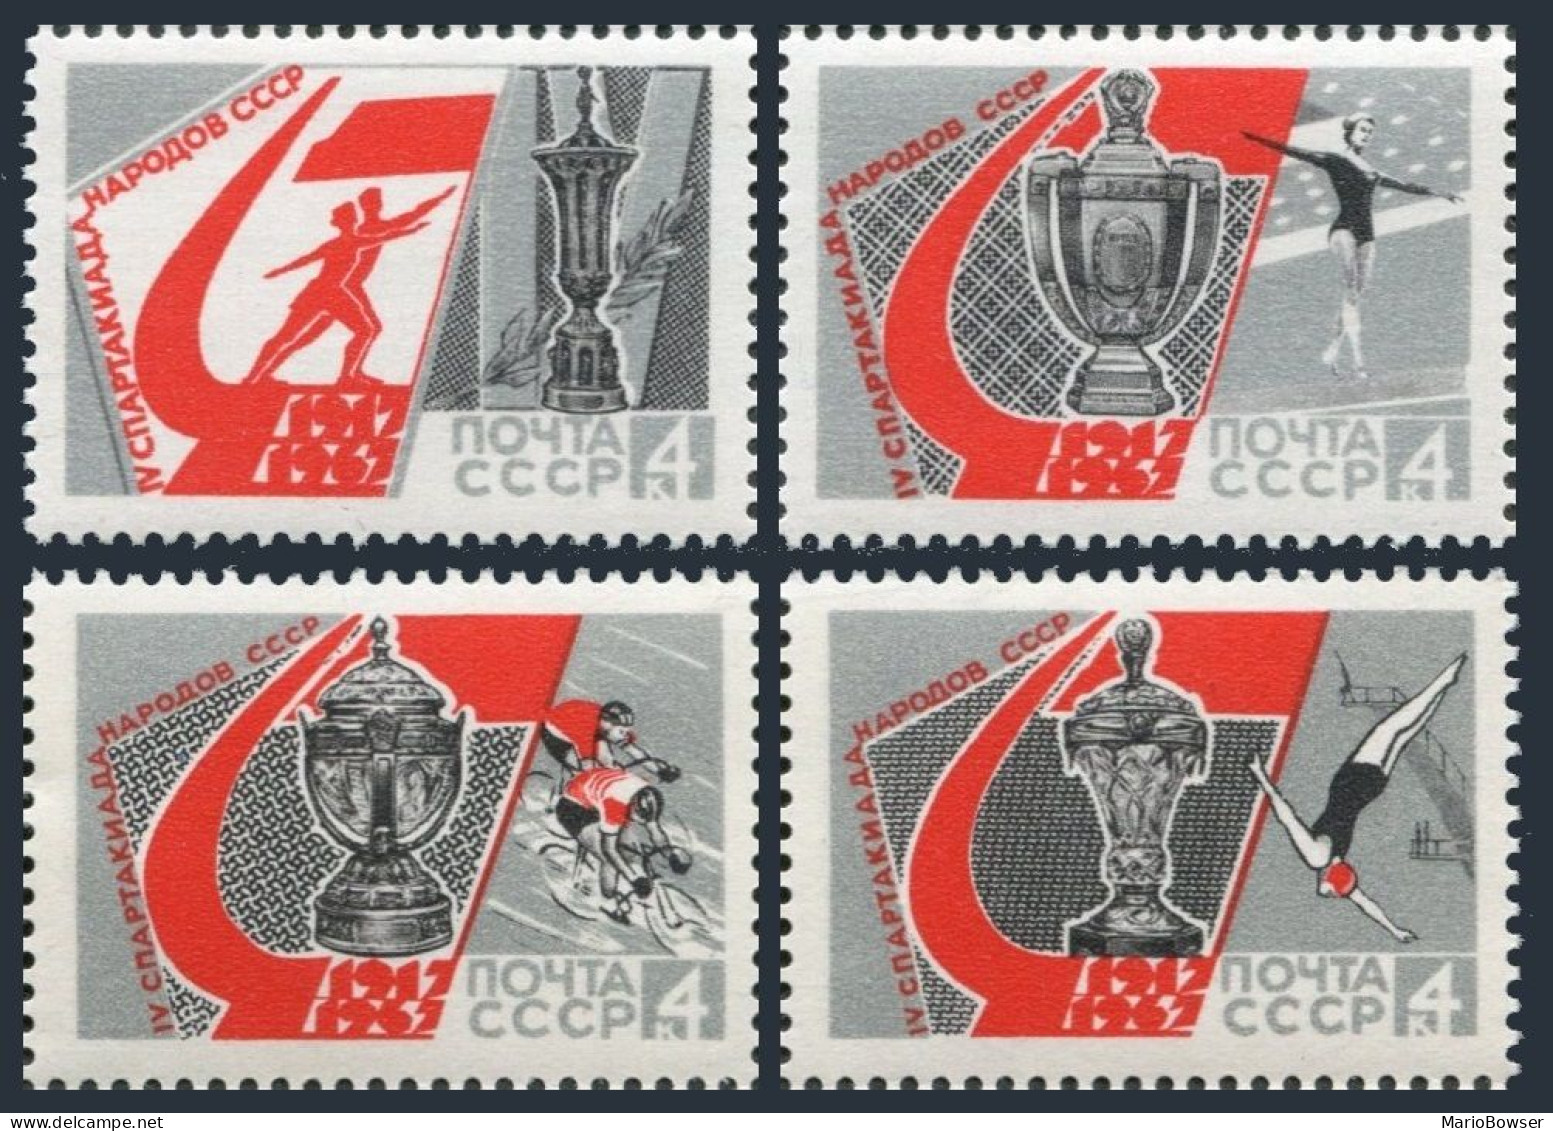 Russia 3337-3340a Pairs, MNH. Michel 3357-3360. Spartacist Games, 1967. - Nuovi